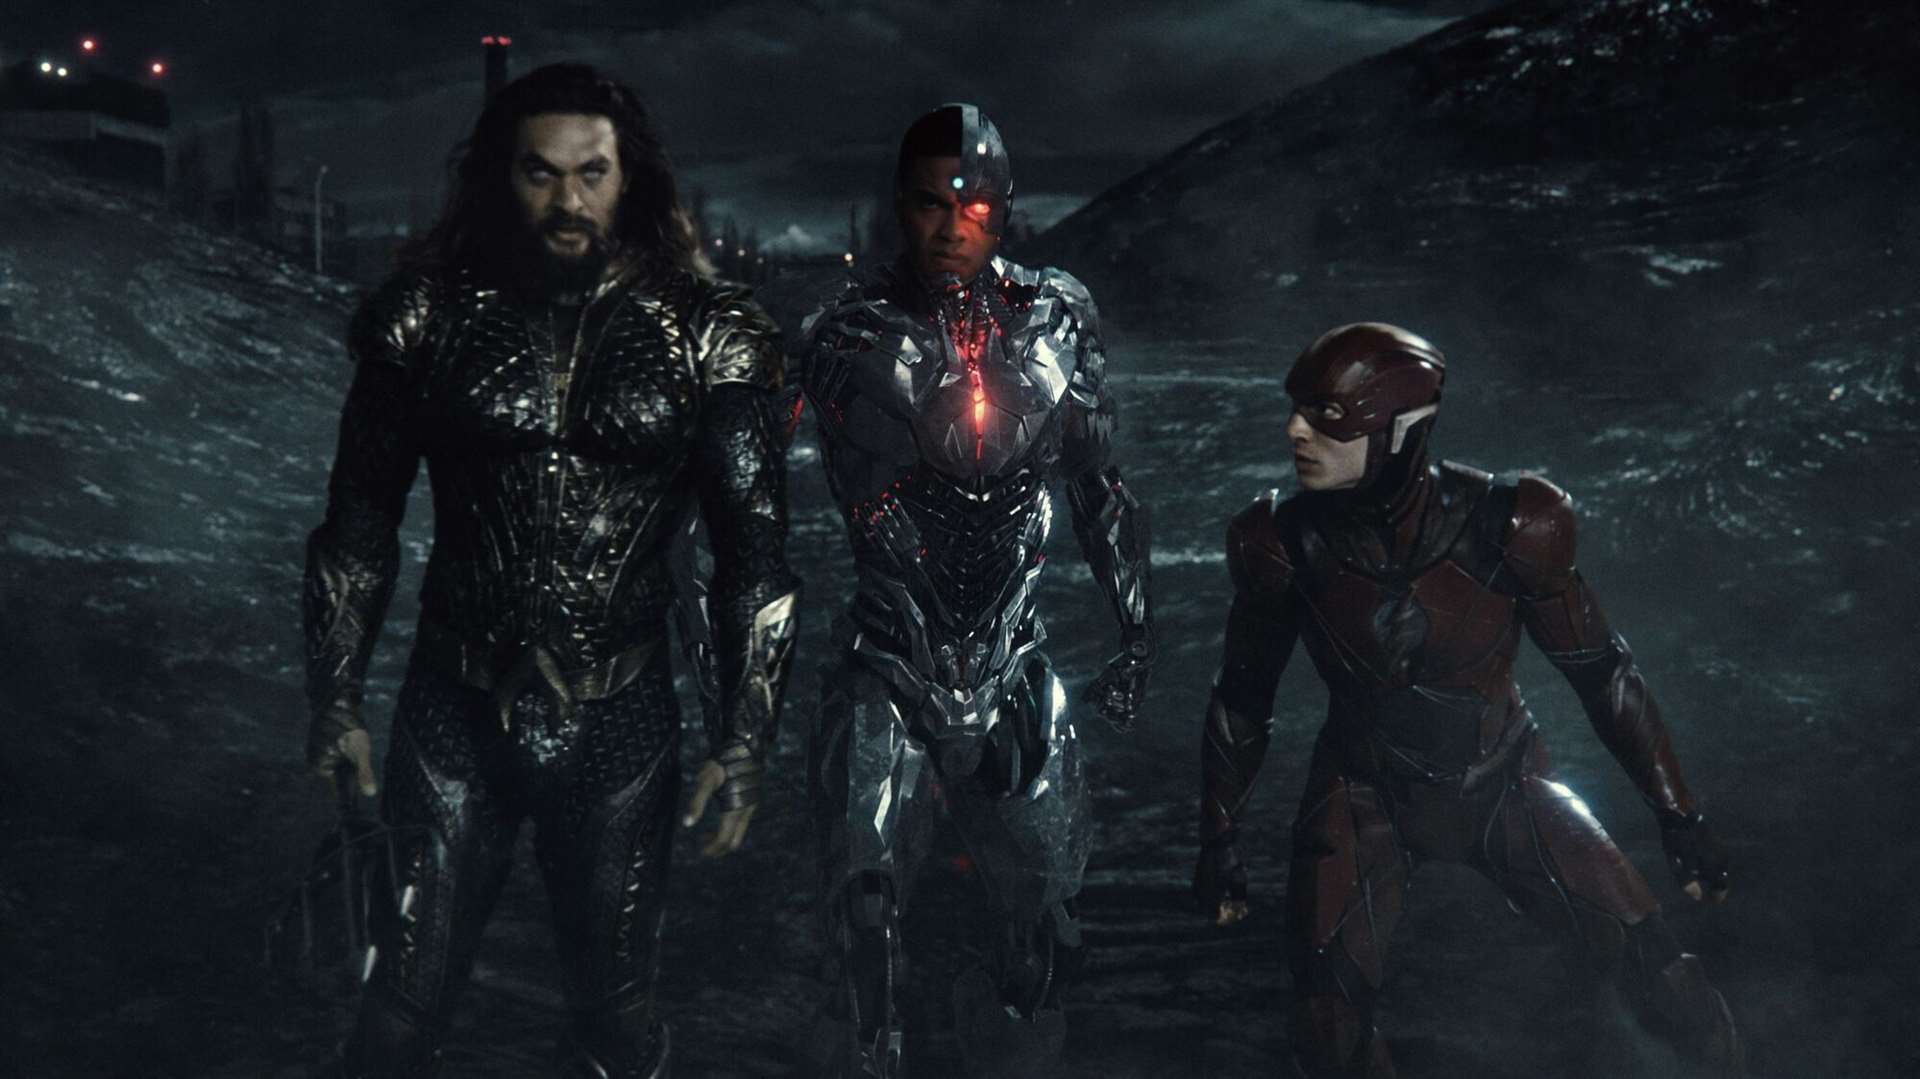 Zack Snyder's Justice League. Pictured: Jason Momoa as Aquaman, Ray Fisher as Cyborg and Ezra Miller as The Flash Picture: Warner Bros. Entertainment Inc./DC Comics, Inc.